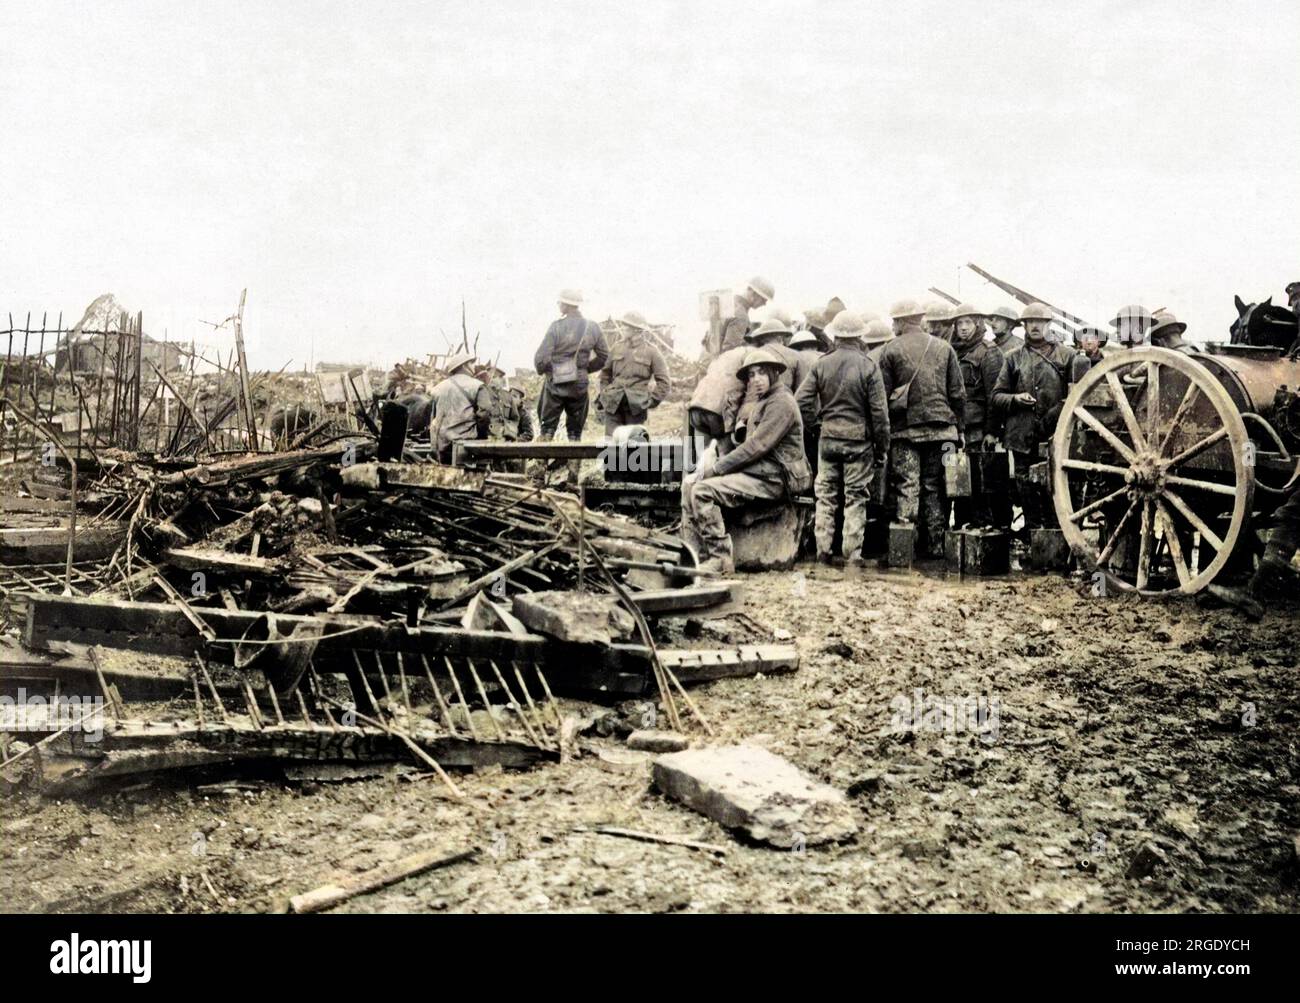 British soldiers drawing water at a pump in a ruined village on the Western Front during World War One. Stock Photo